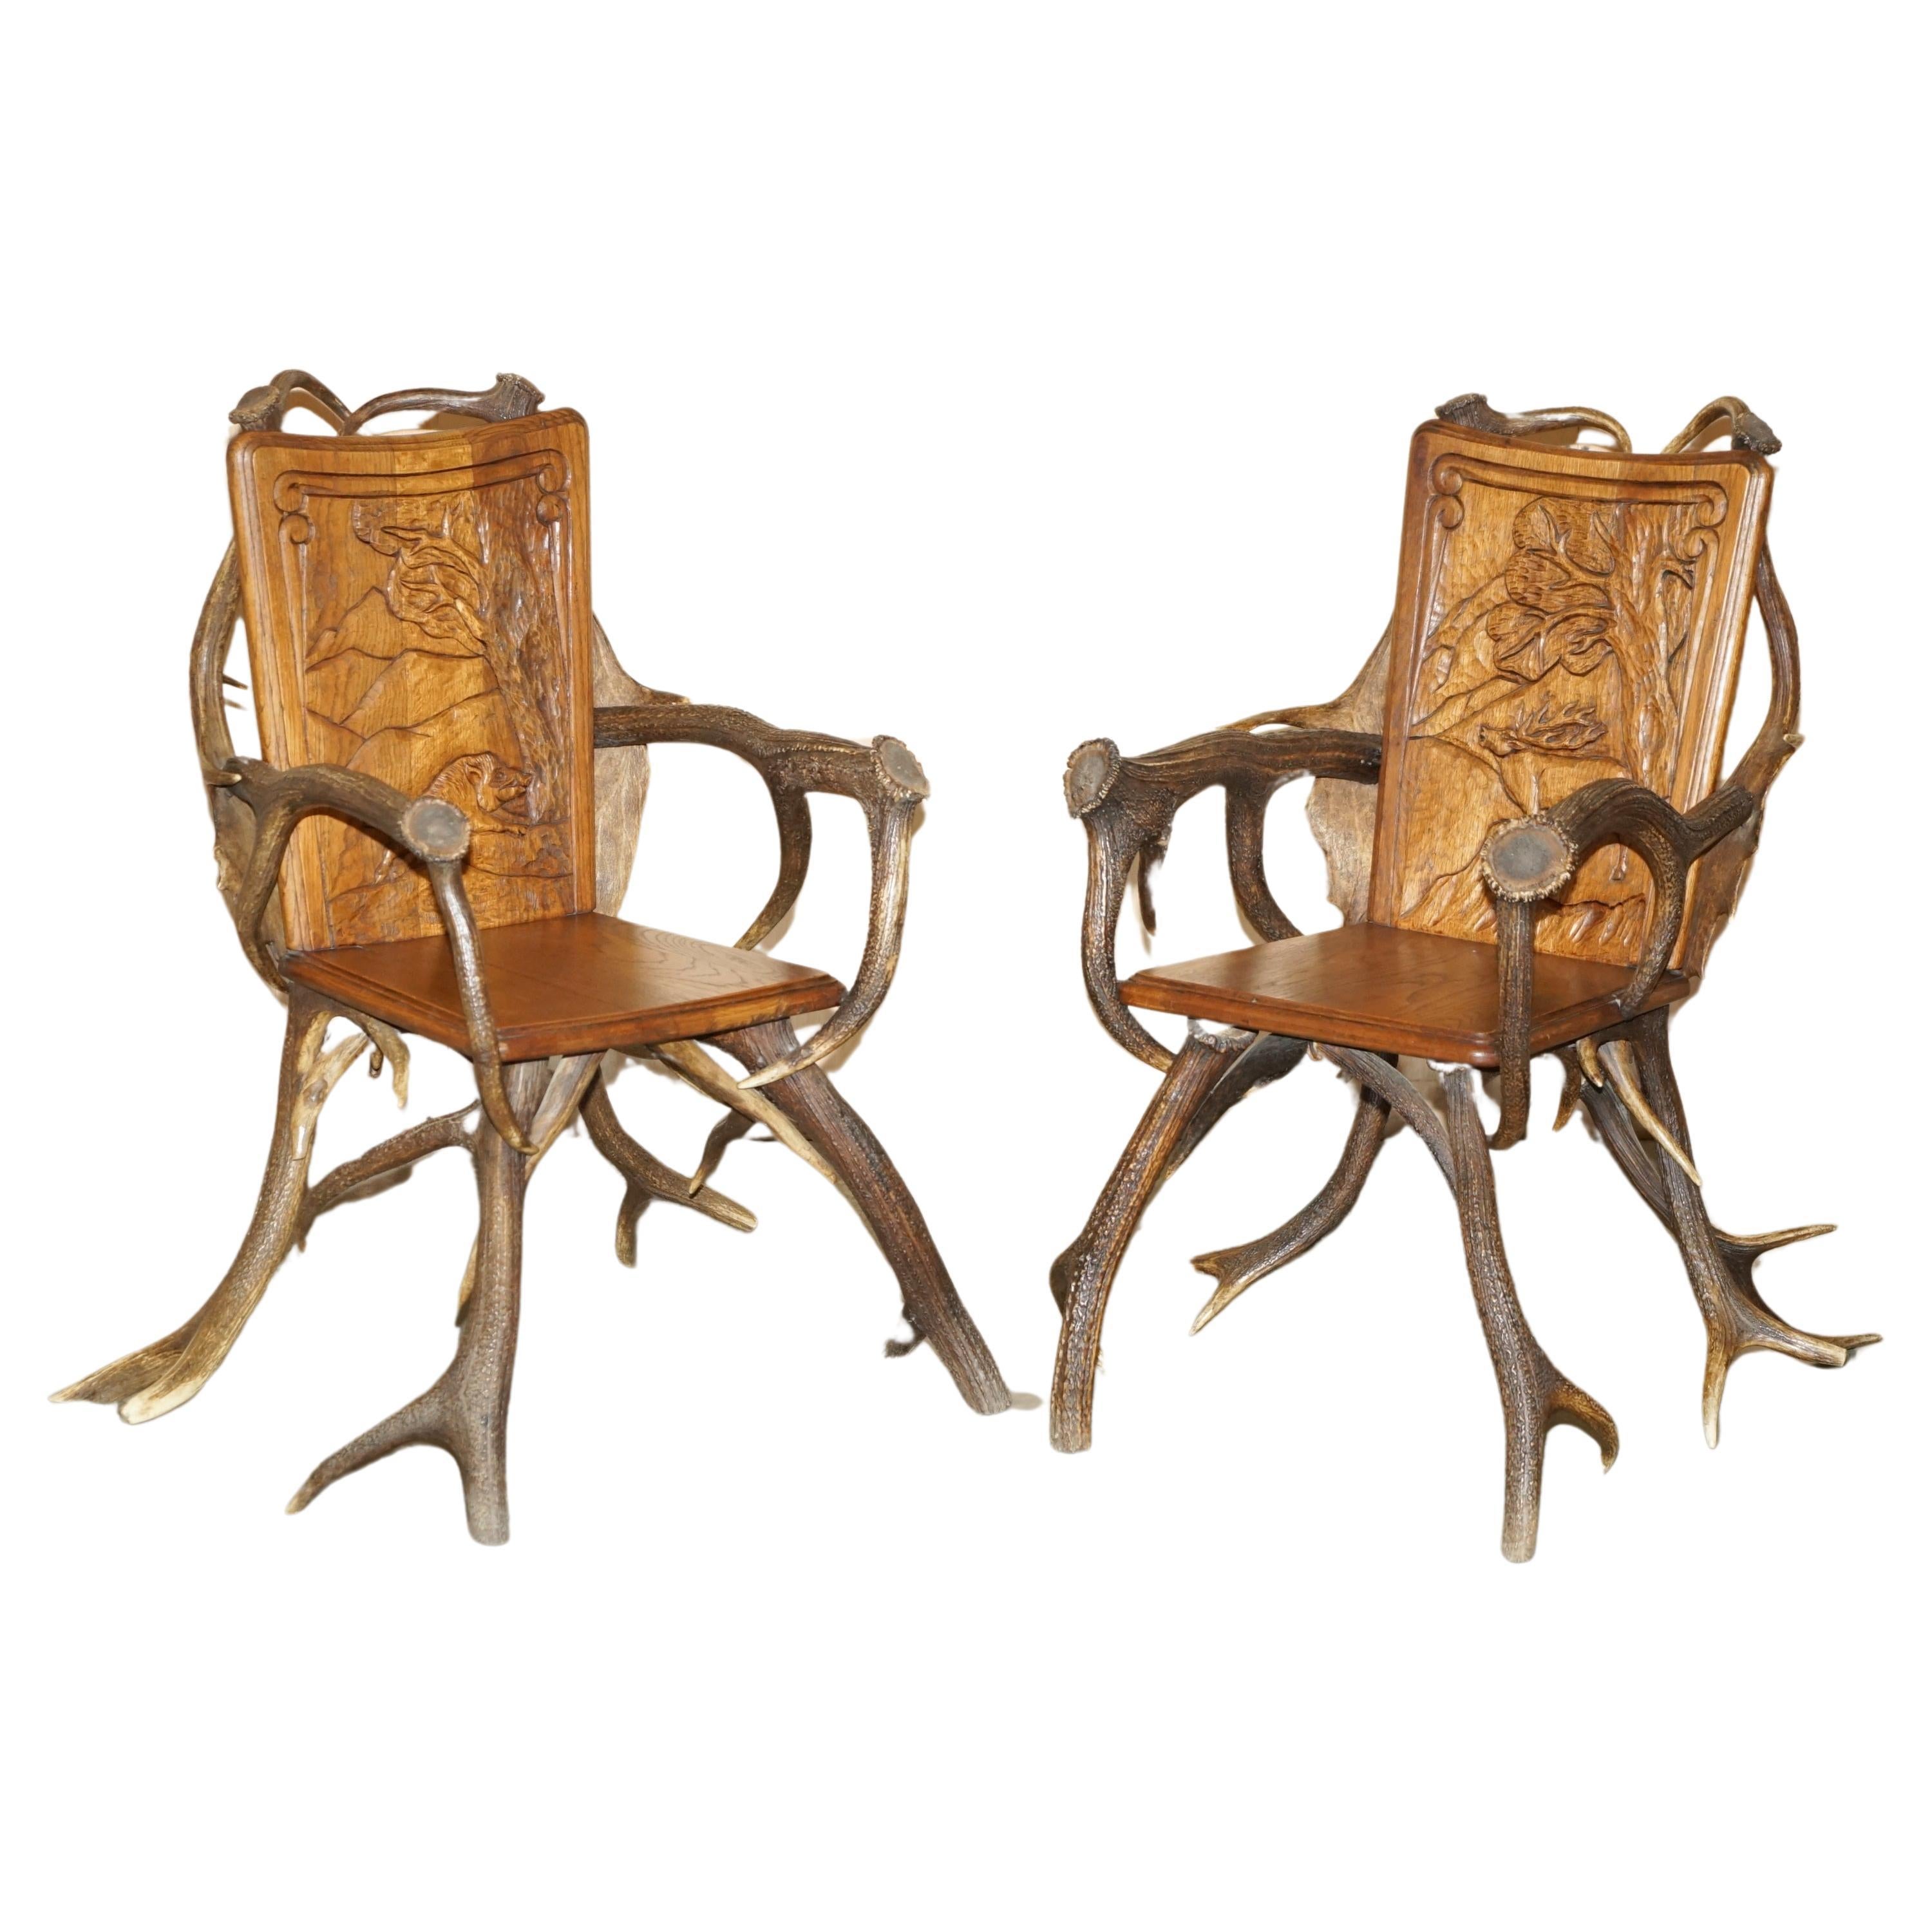 AIR OF ANTIQUE GERMAN BLACK FOREST CARved ANTLER ARMCHAiRS PART OF A SUITE